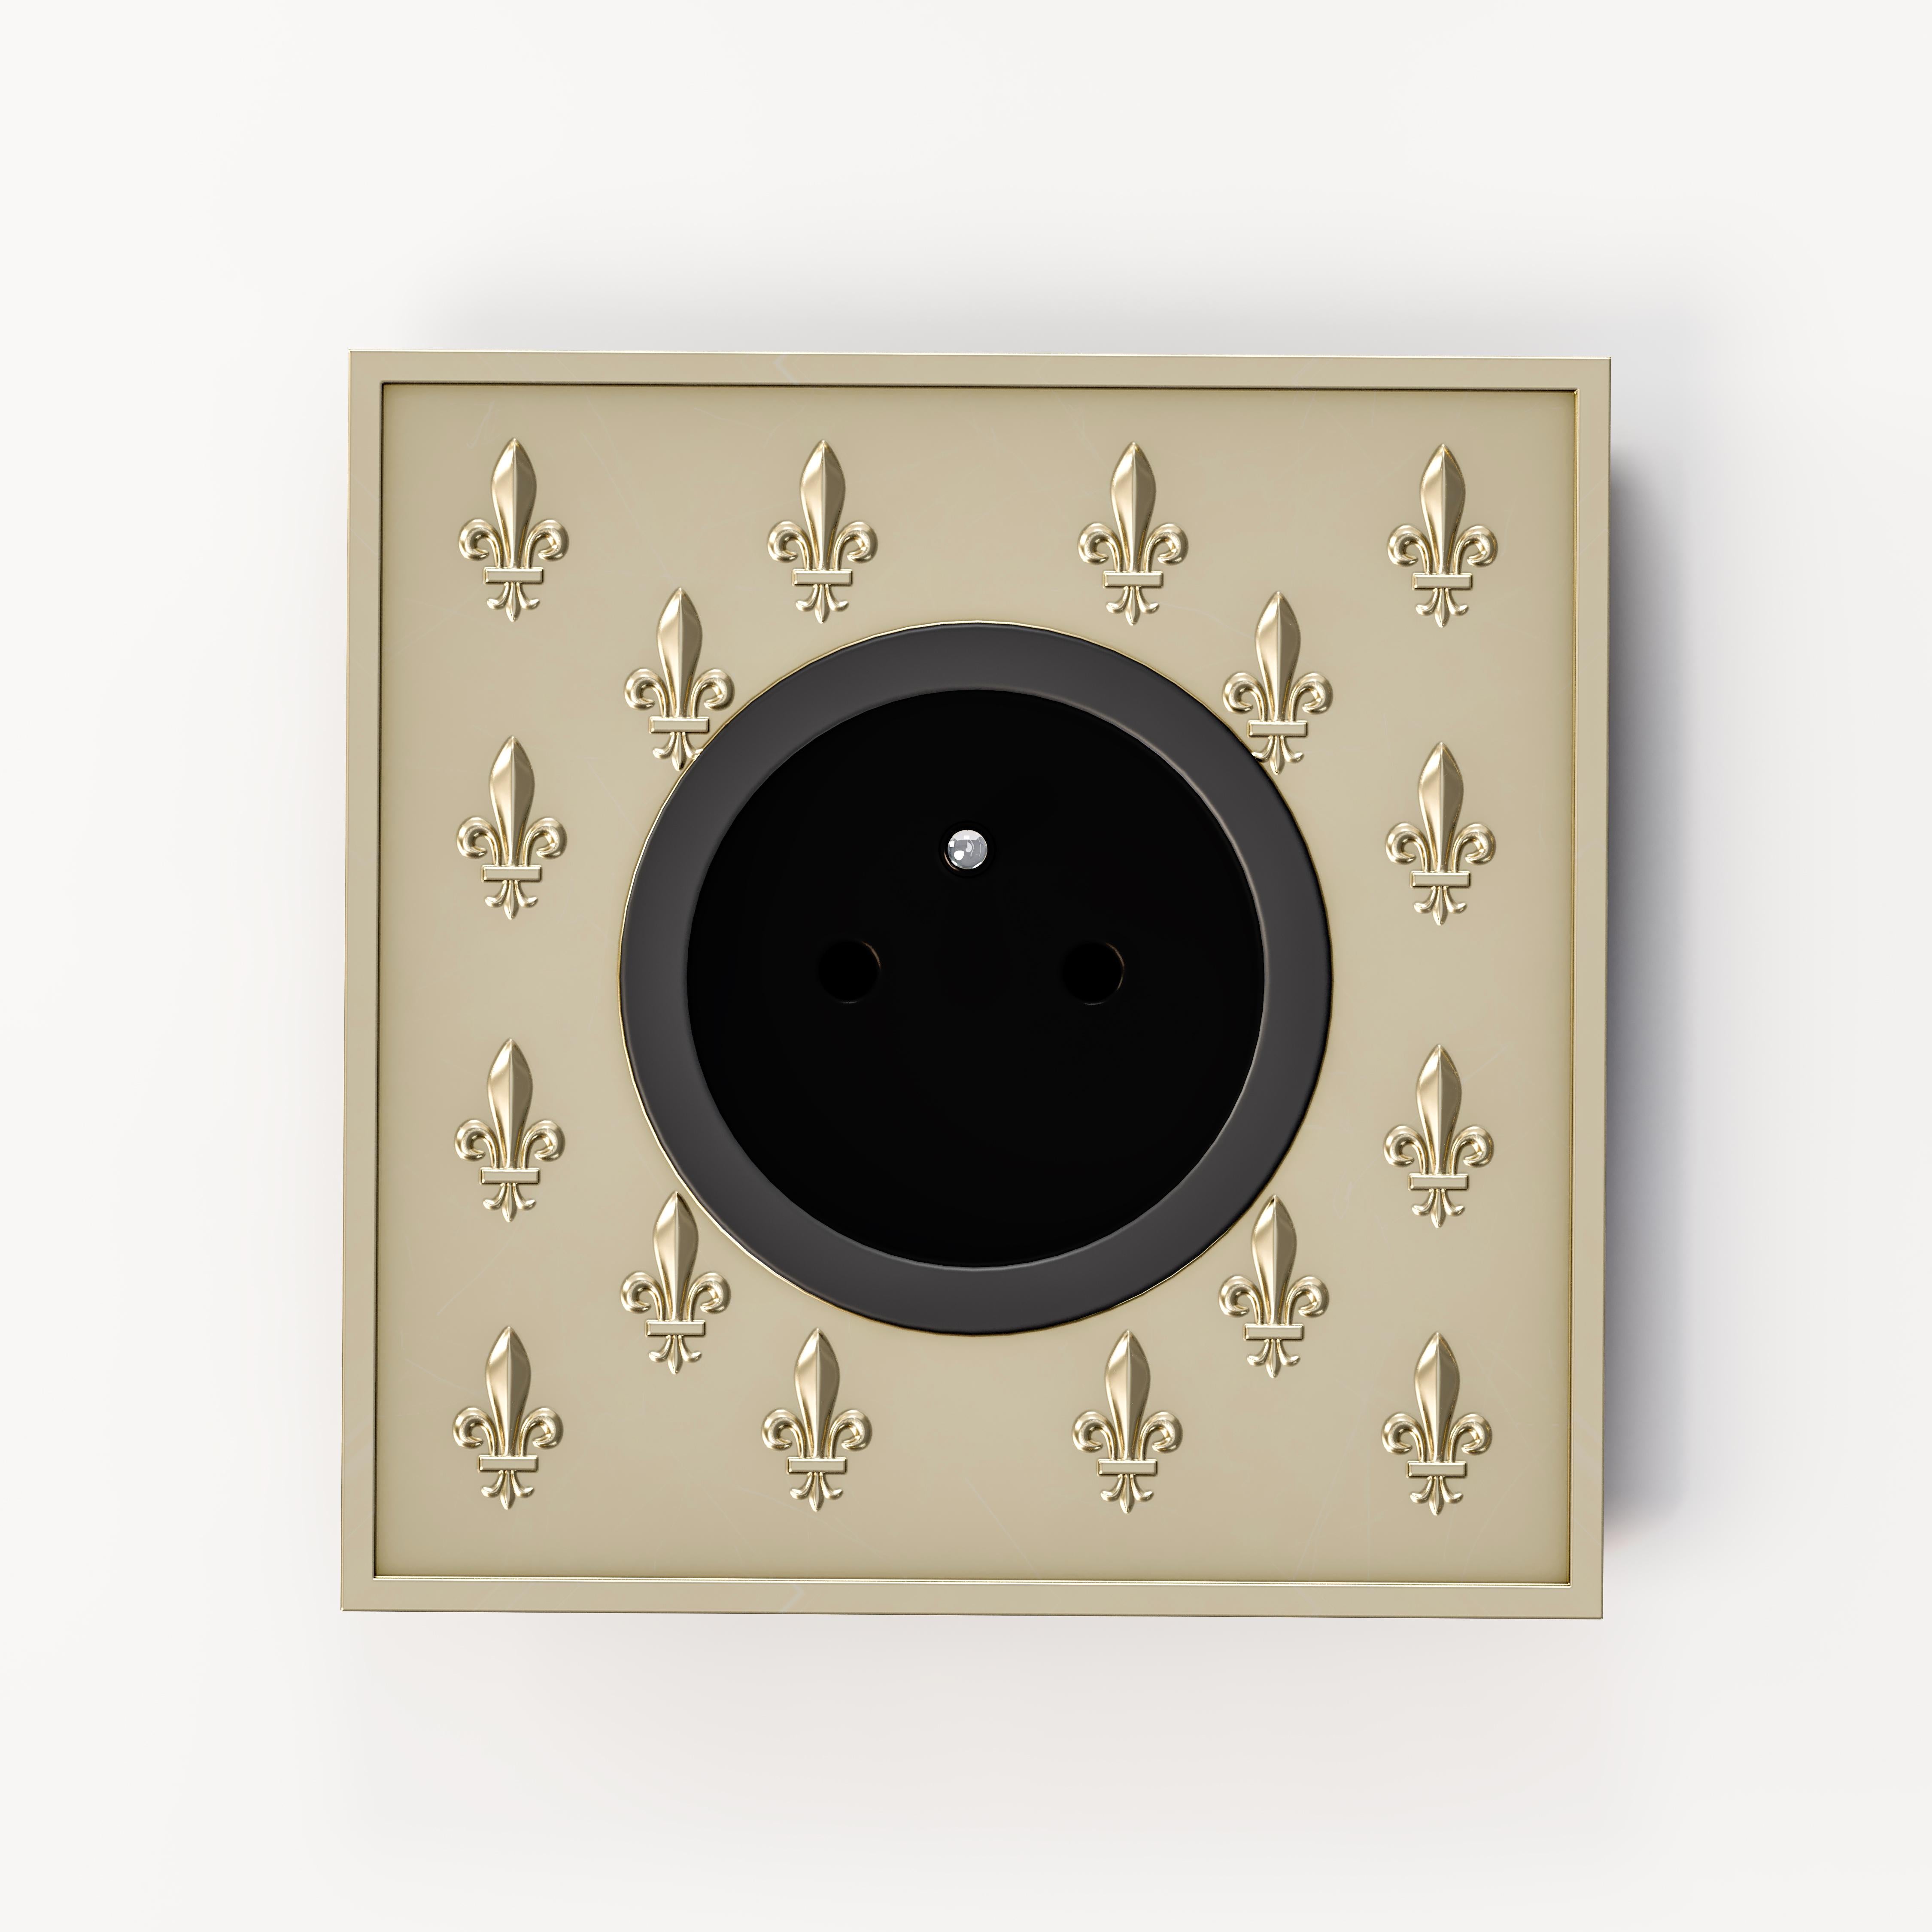 Versailles Nickel Light Switch by Jérôme Bugara
Dimensions: W 9,4 x H 9,4 cm.
Materials: Nickel.

Available in different finishes. Please contact us.

Jérôme Bugara, trained at the prestigious Ecole Boulle, is a renowned interior architect and